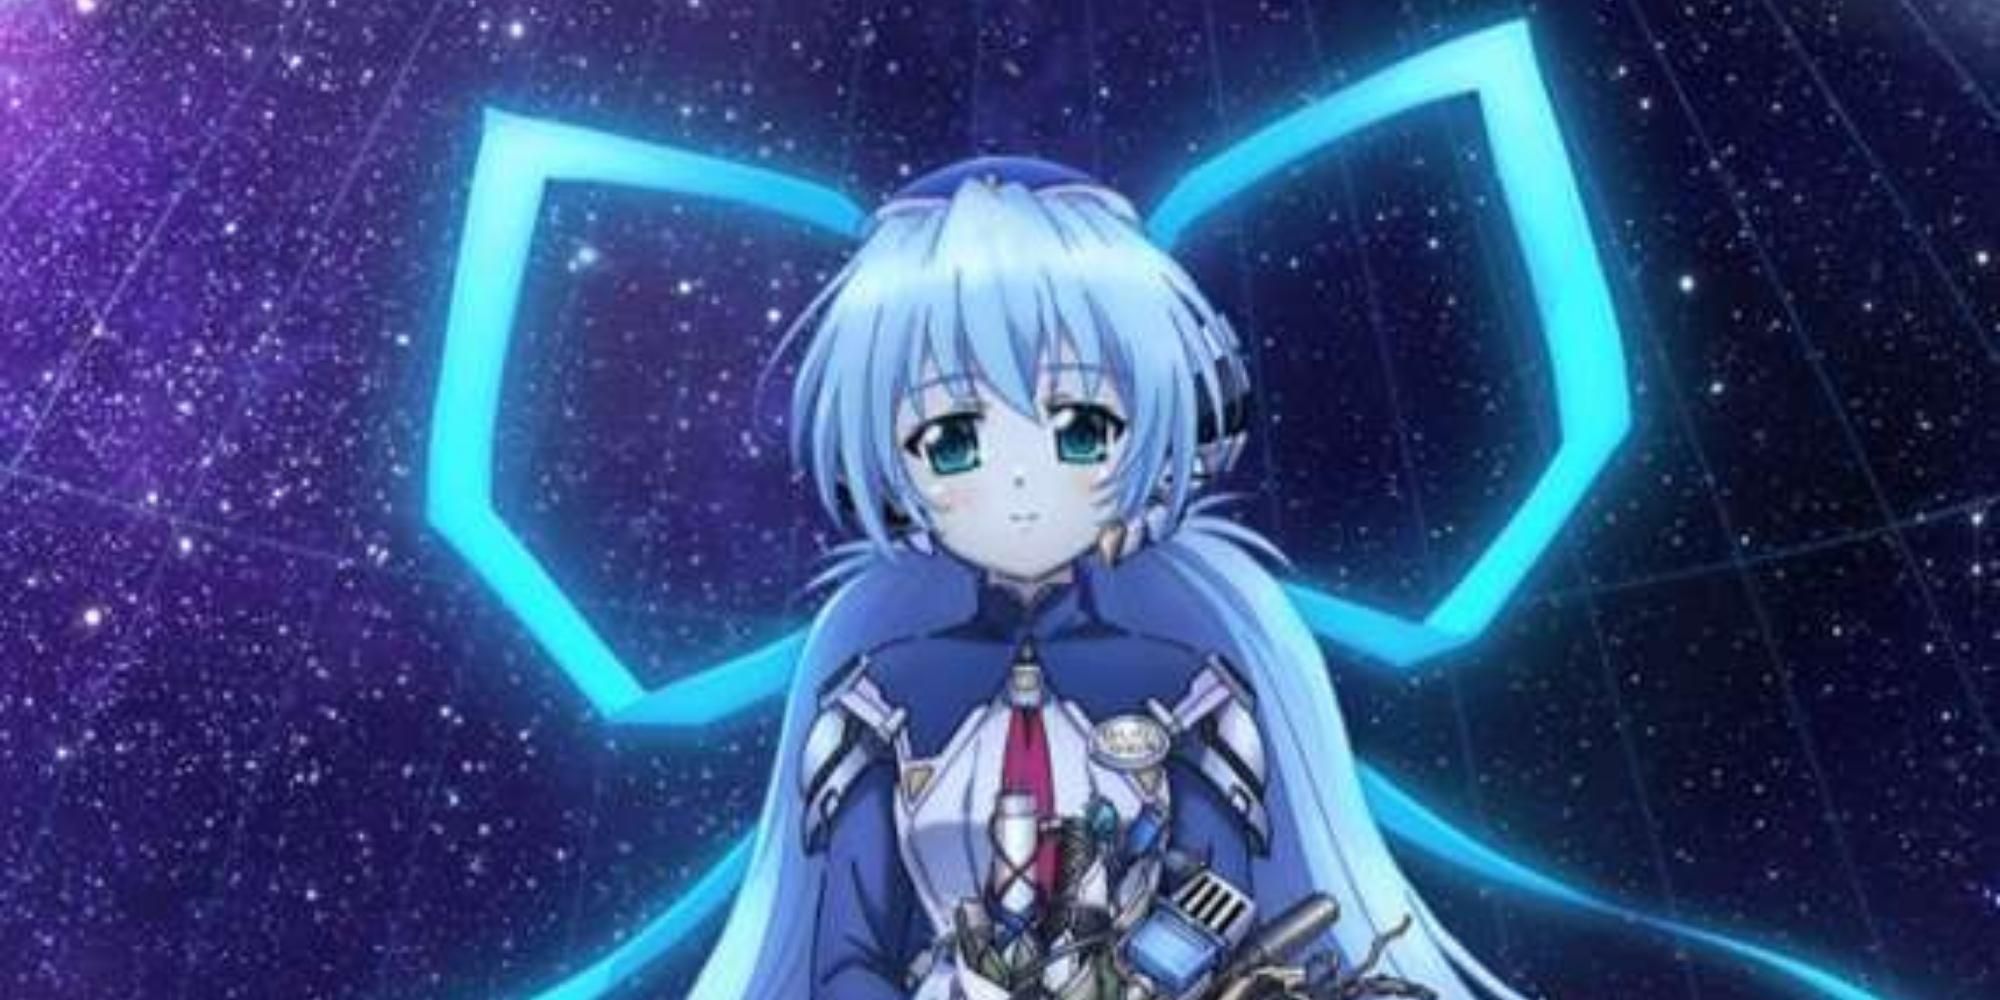 Yumemi in Planetarian The Reverie of a Little Planet